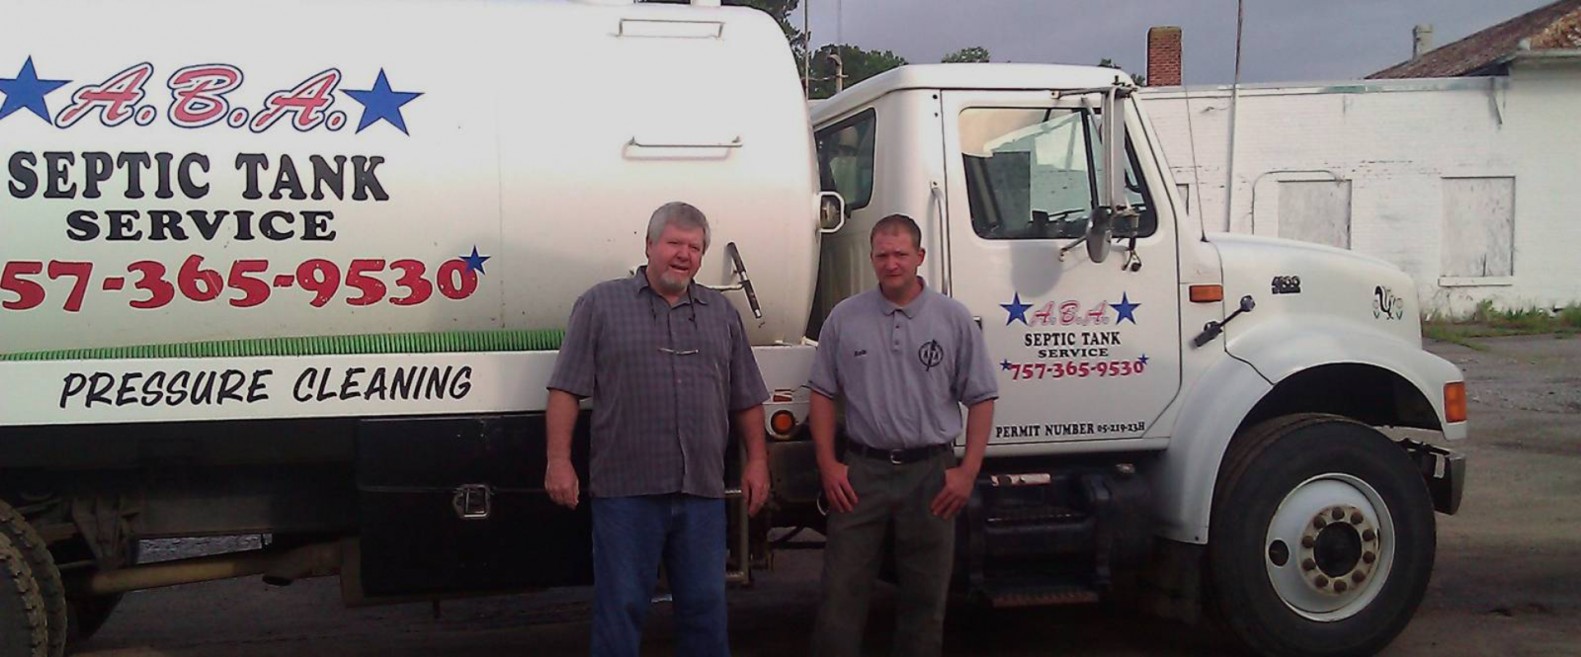 A.B.A. Well and Septic Service Inc. - Septic System Maintenance and Repairs  in Southeastern Virginia